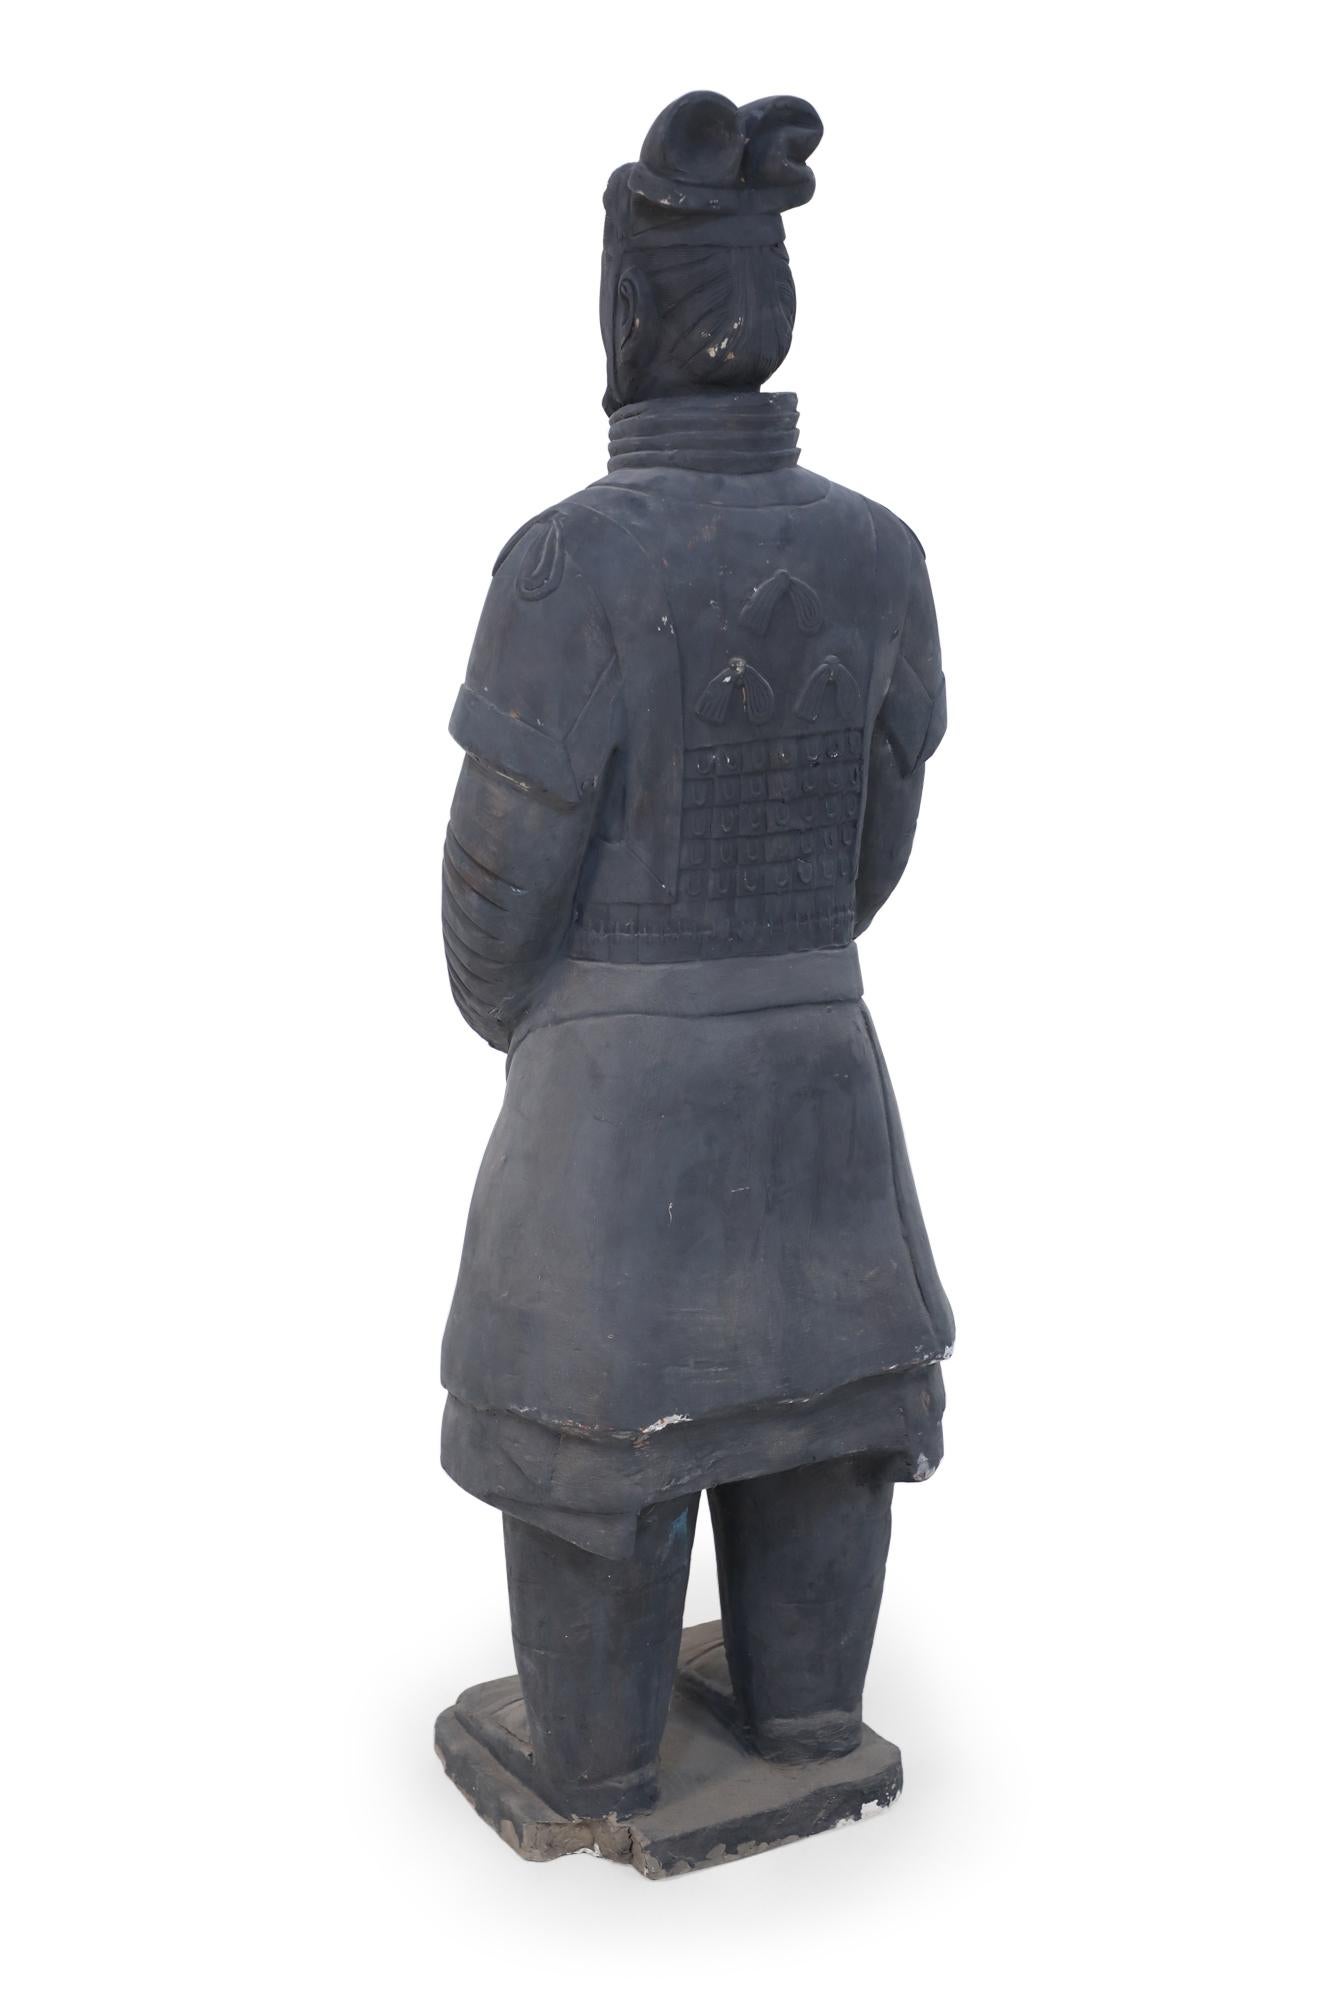 20th Century Chinese Qin Dynasty Style Life-Size Terracotta Soldier Statue